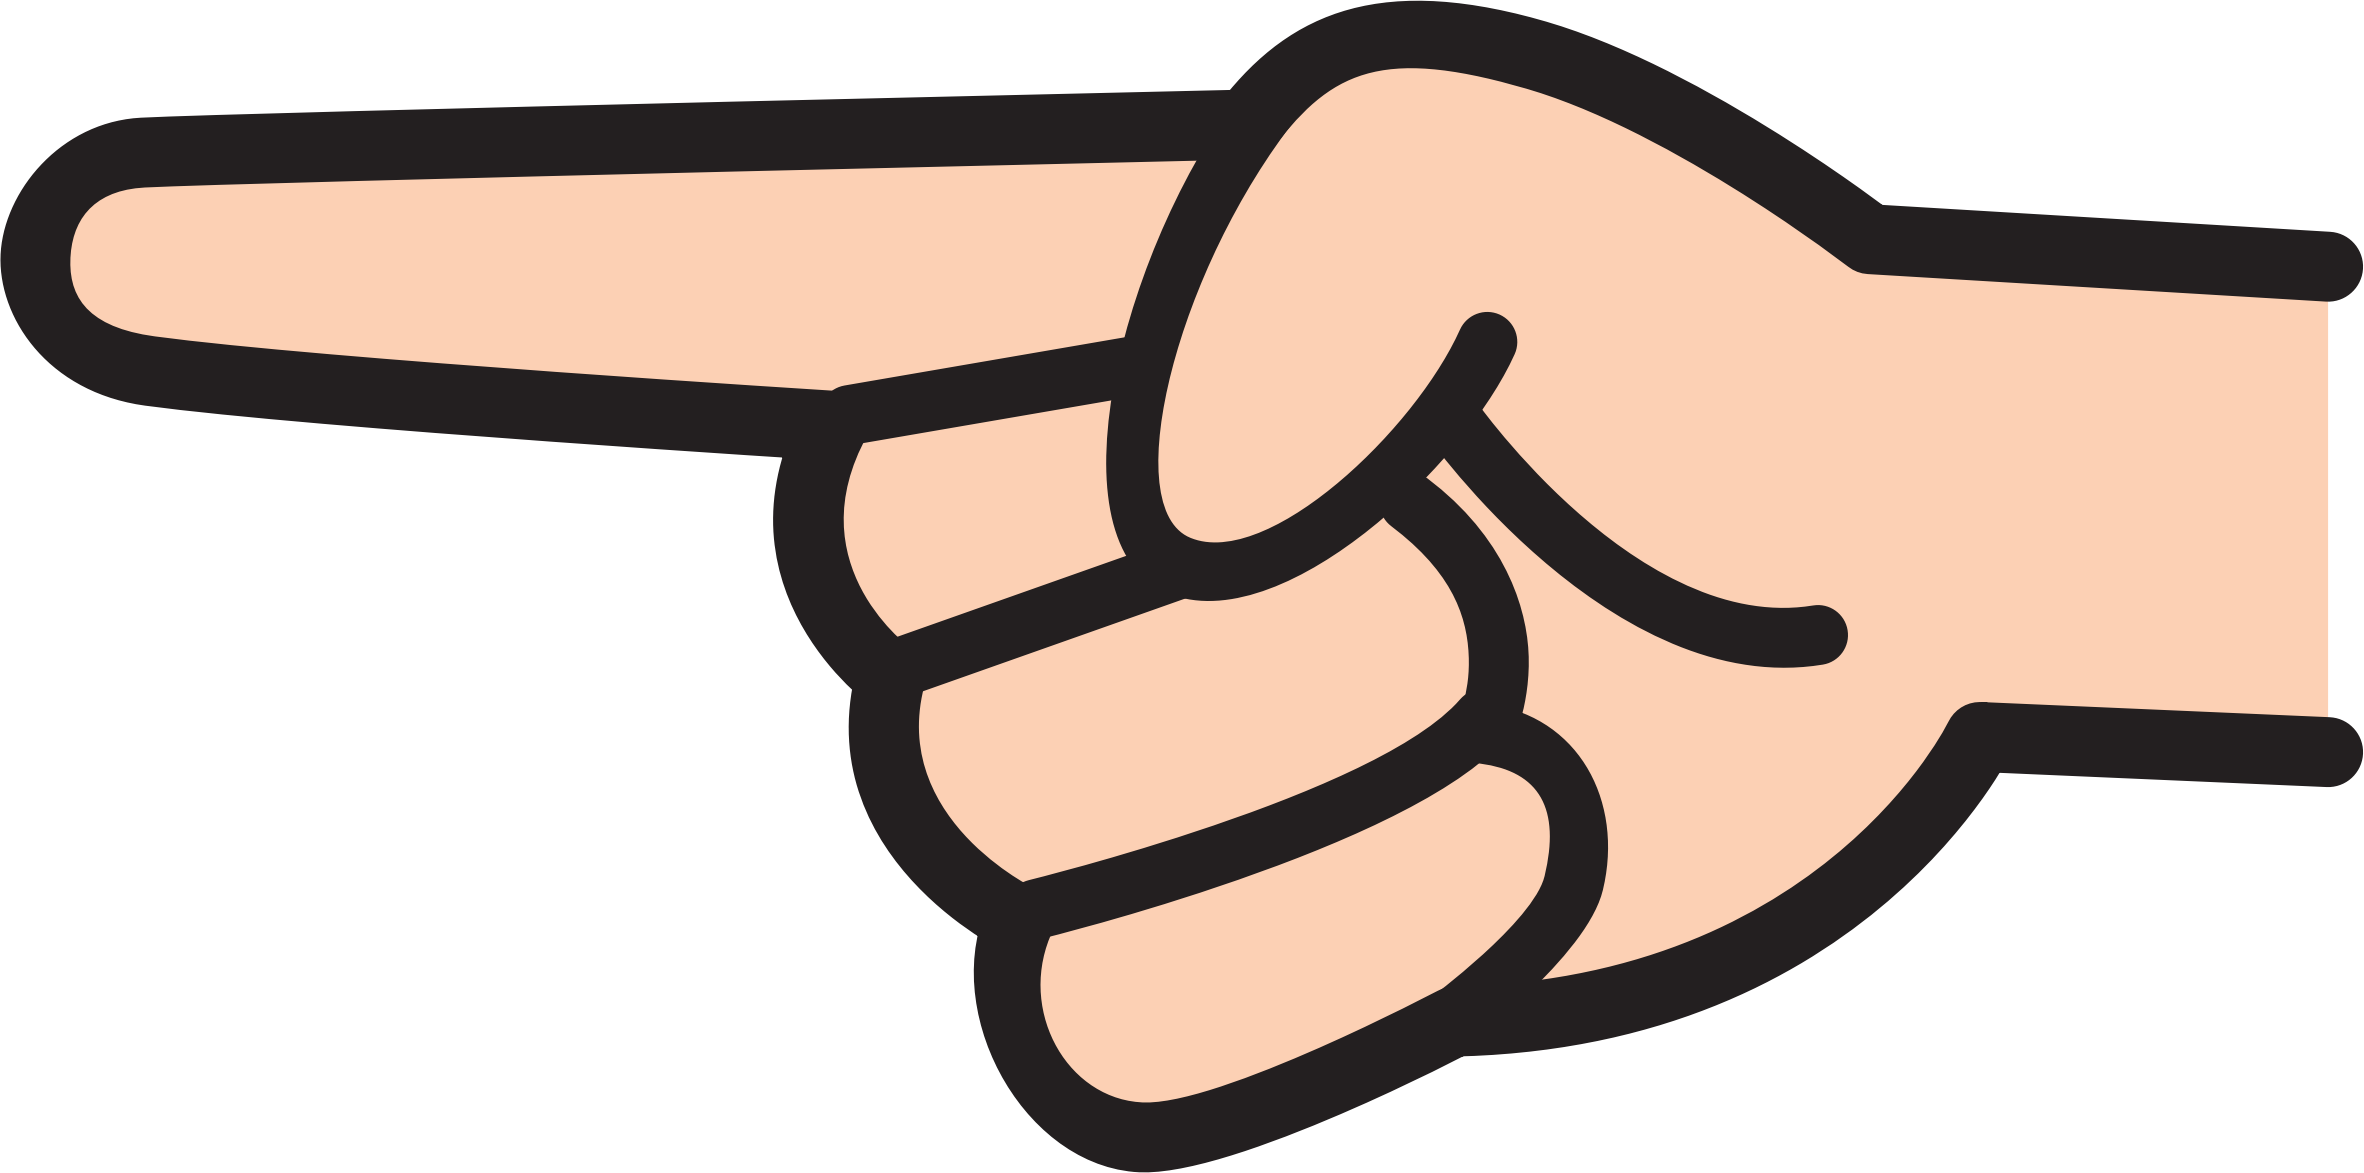 Pointing clipart finger sign, Pointing finger sign